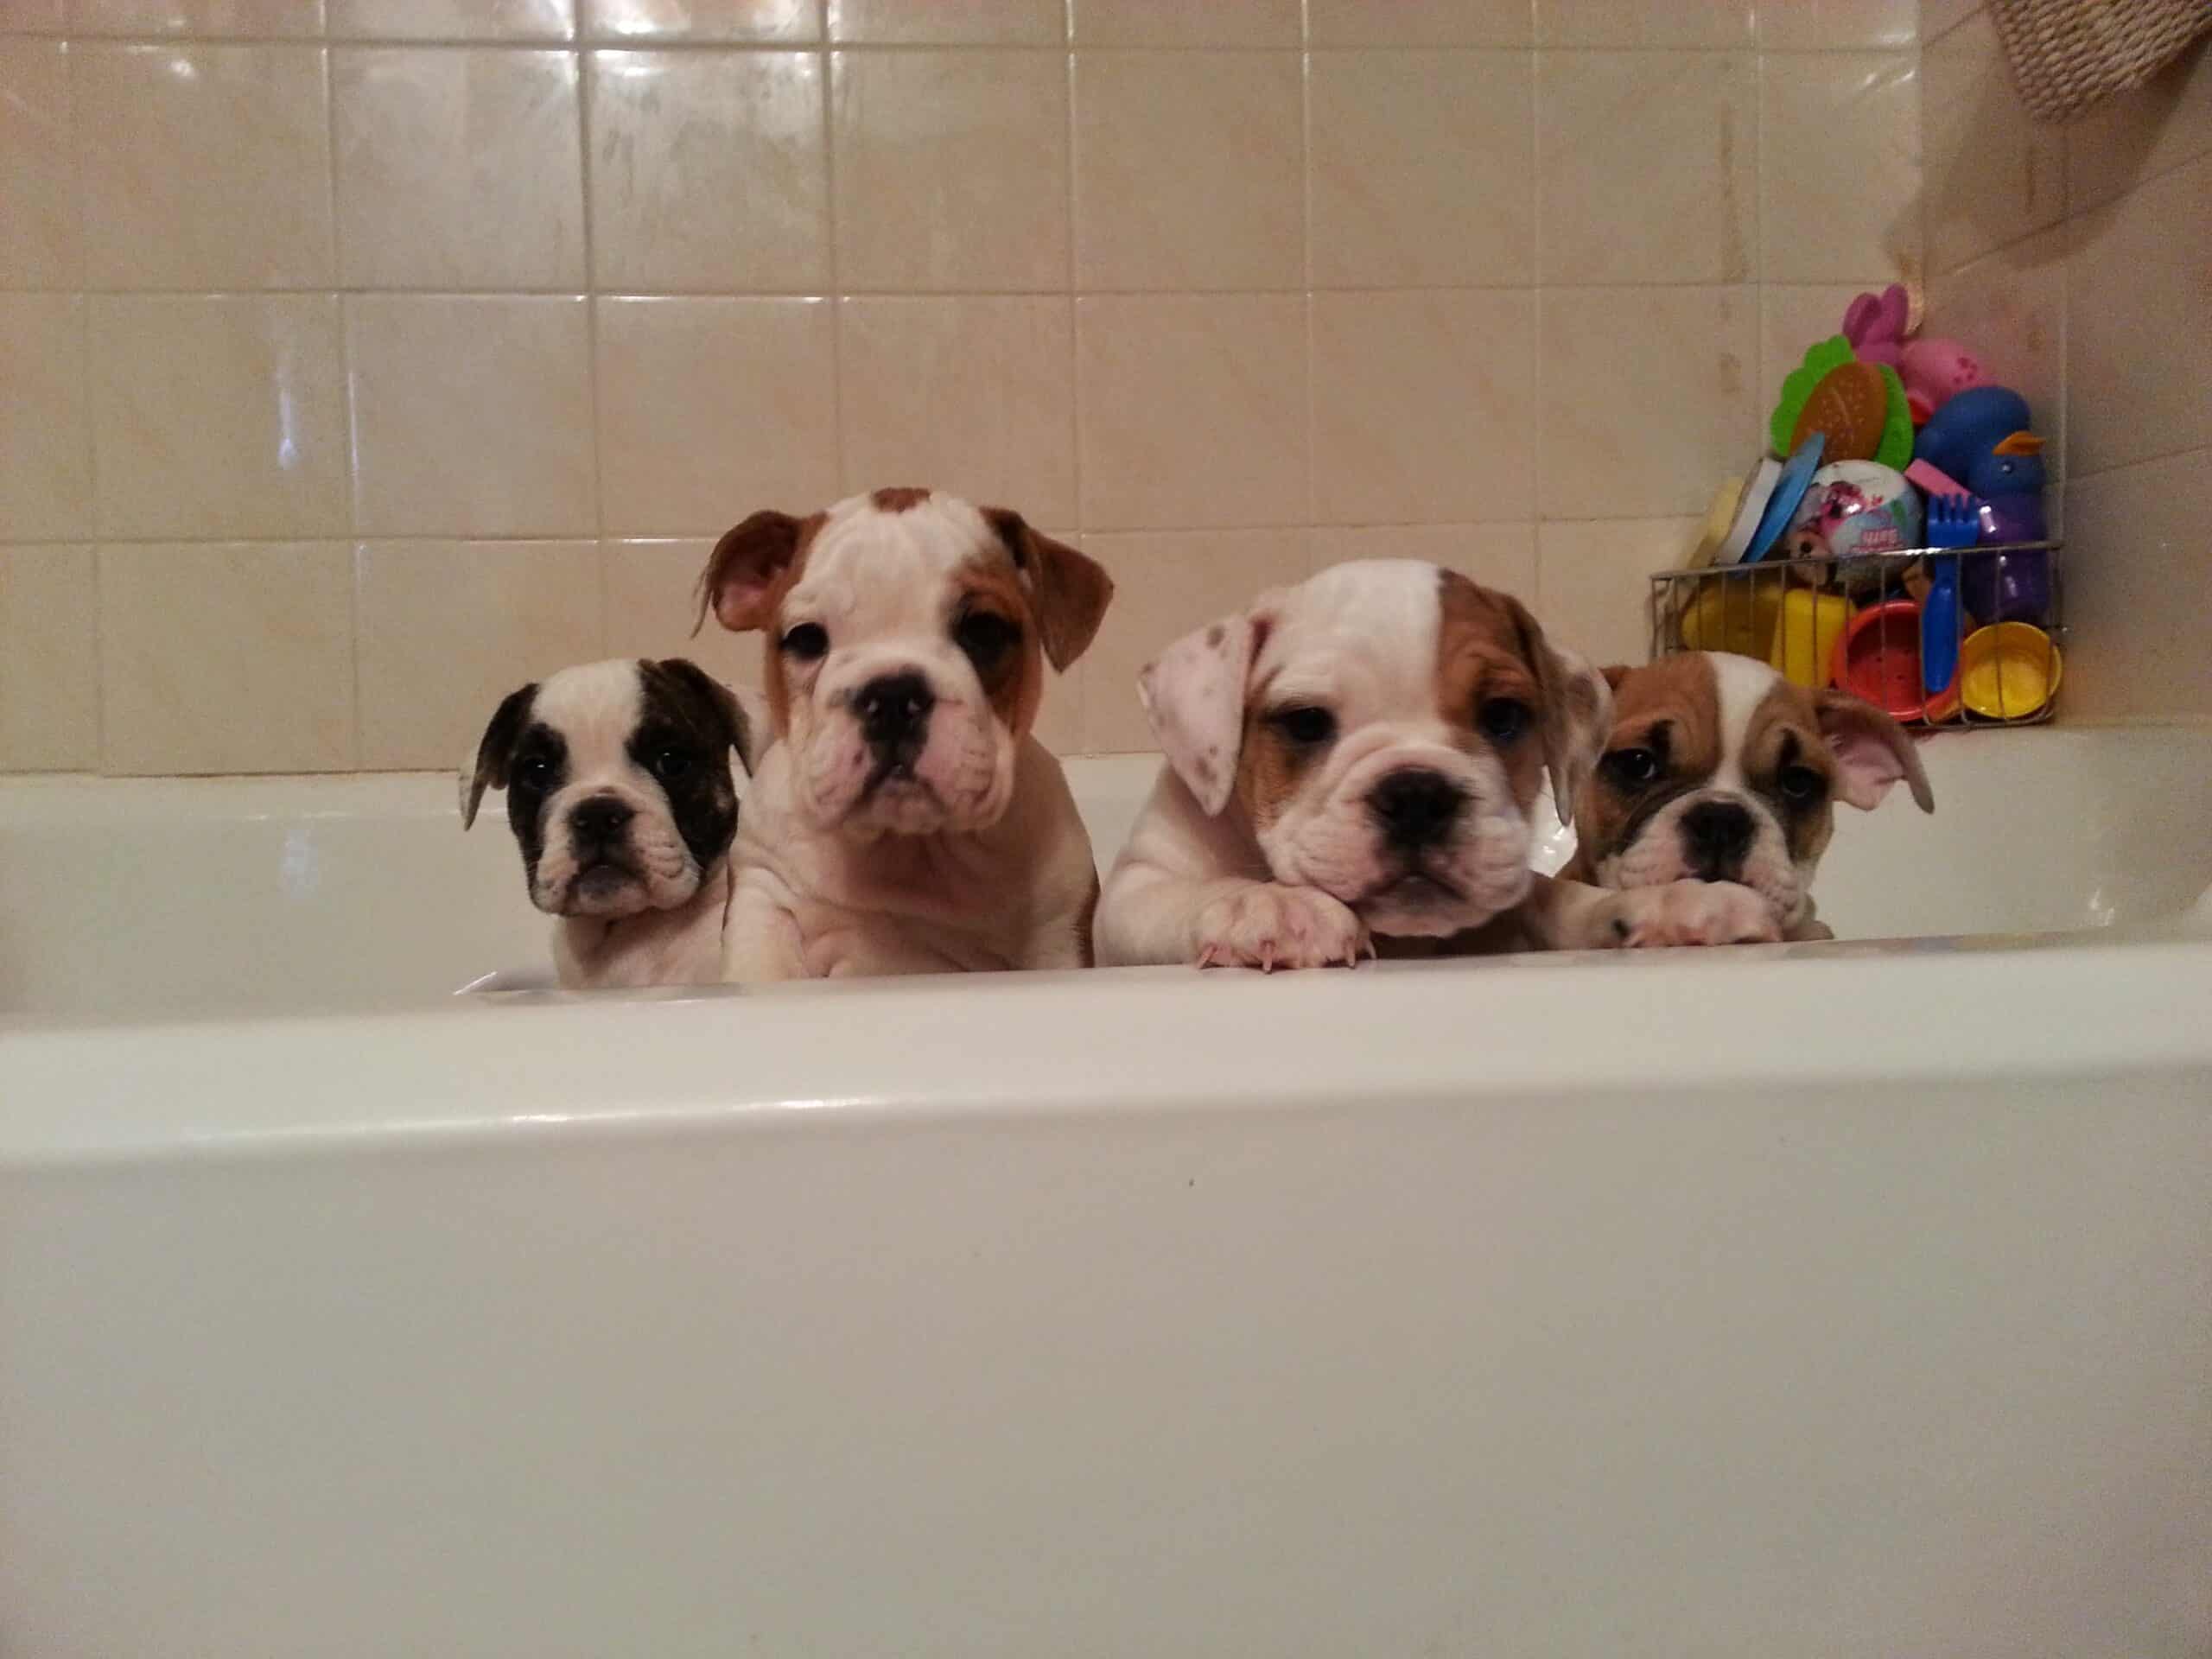 How to Give Your Bulldog Puppy a Bath - Bruiser BulldogsBruiser Bulldogs